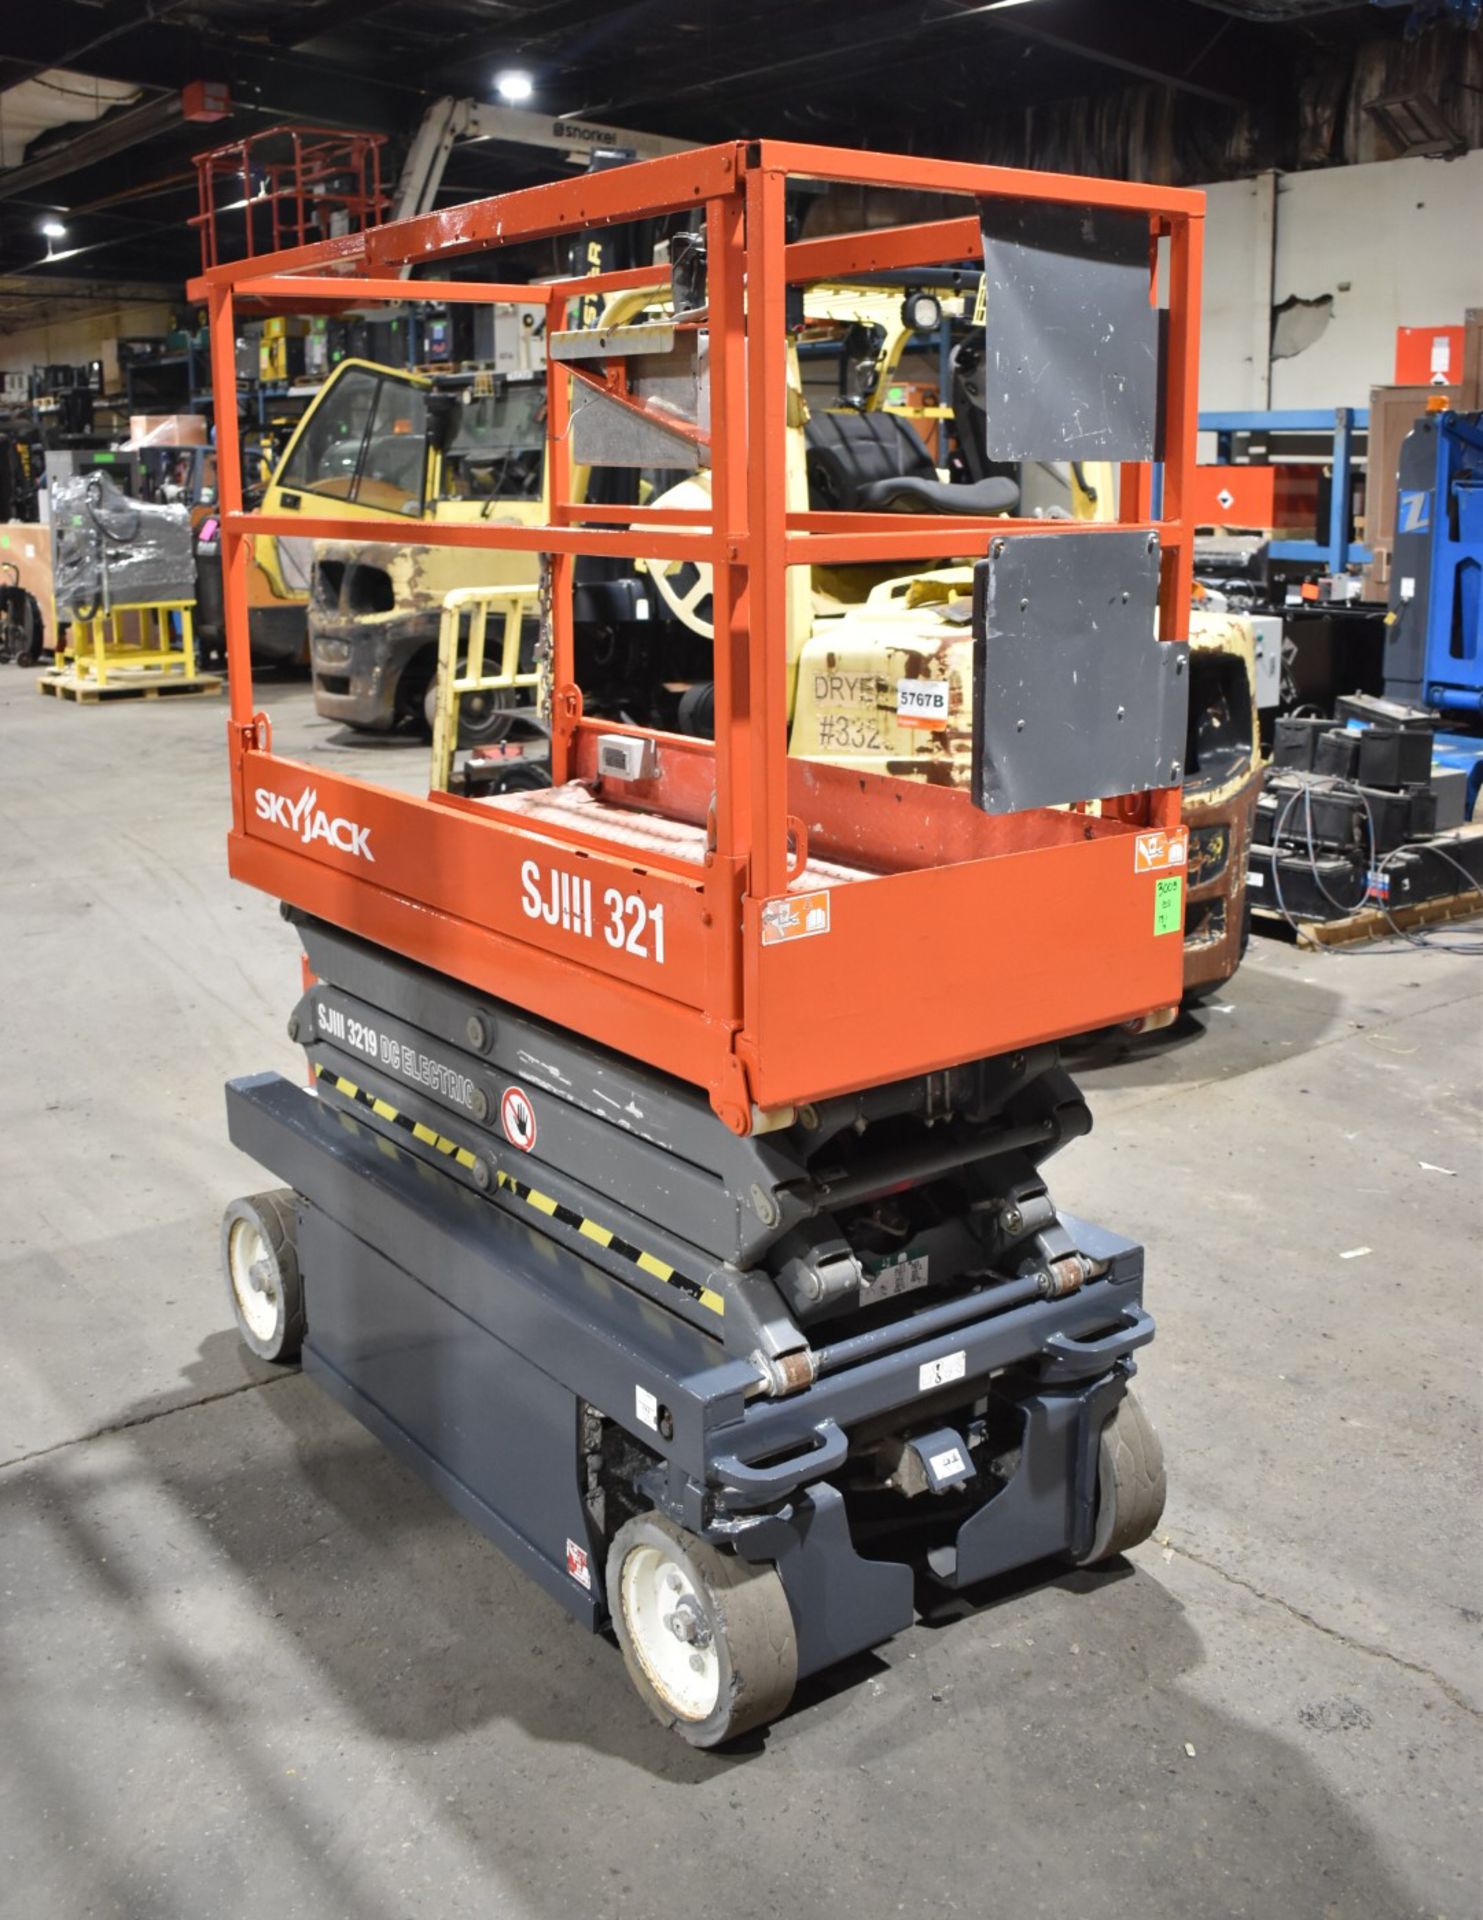 SKYJACK (2013) III 3219 ELECTRIC SCISSOR LIFT WITH 24V BATTERY, 550LBS CAPACITY, 19' MAX HEIGHT, - Image 6 of 8